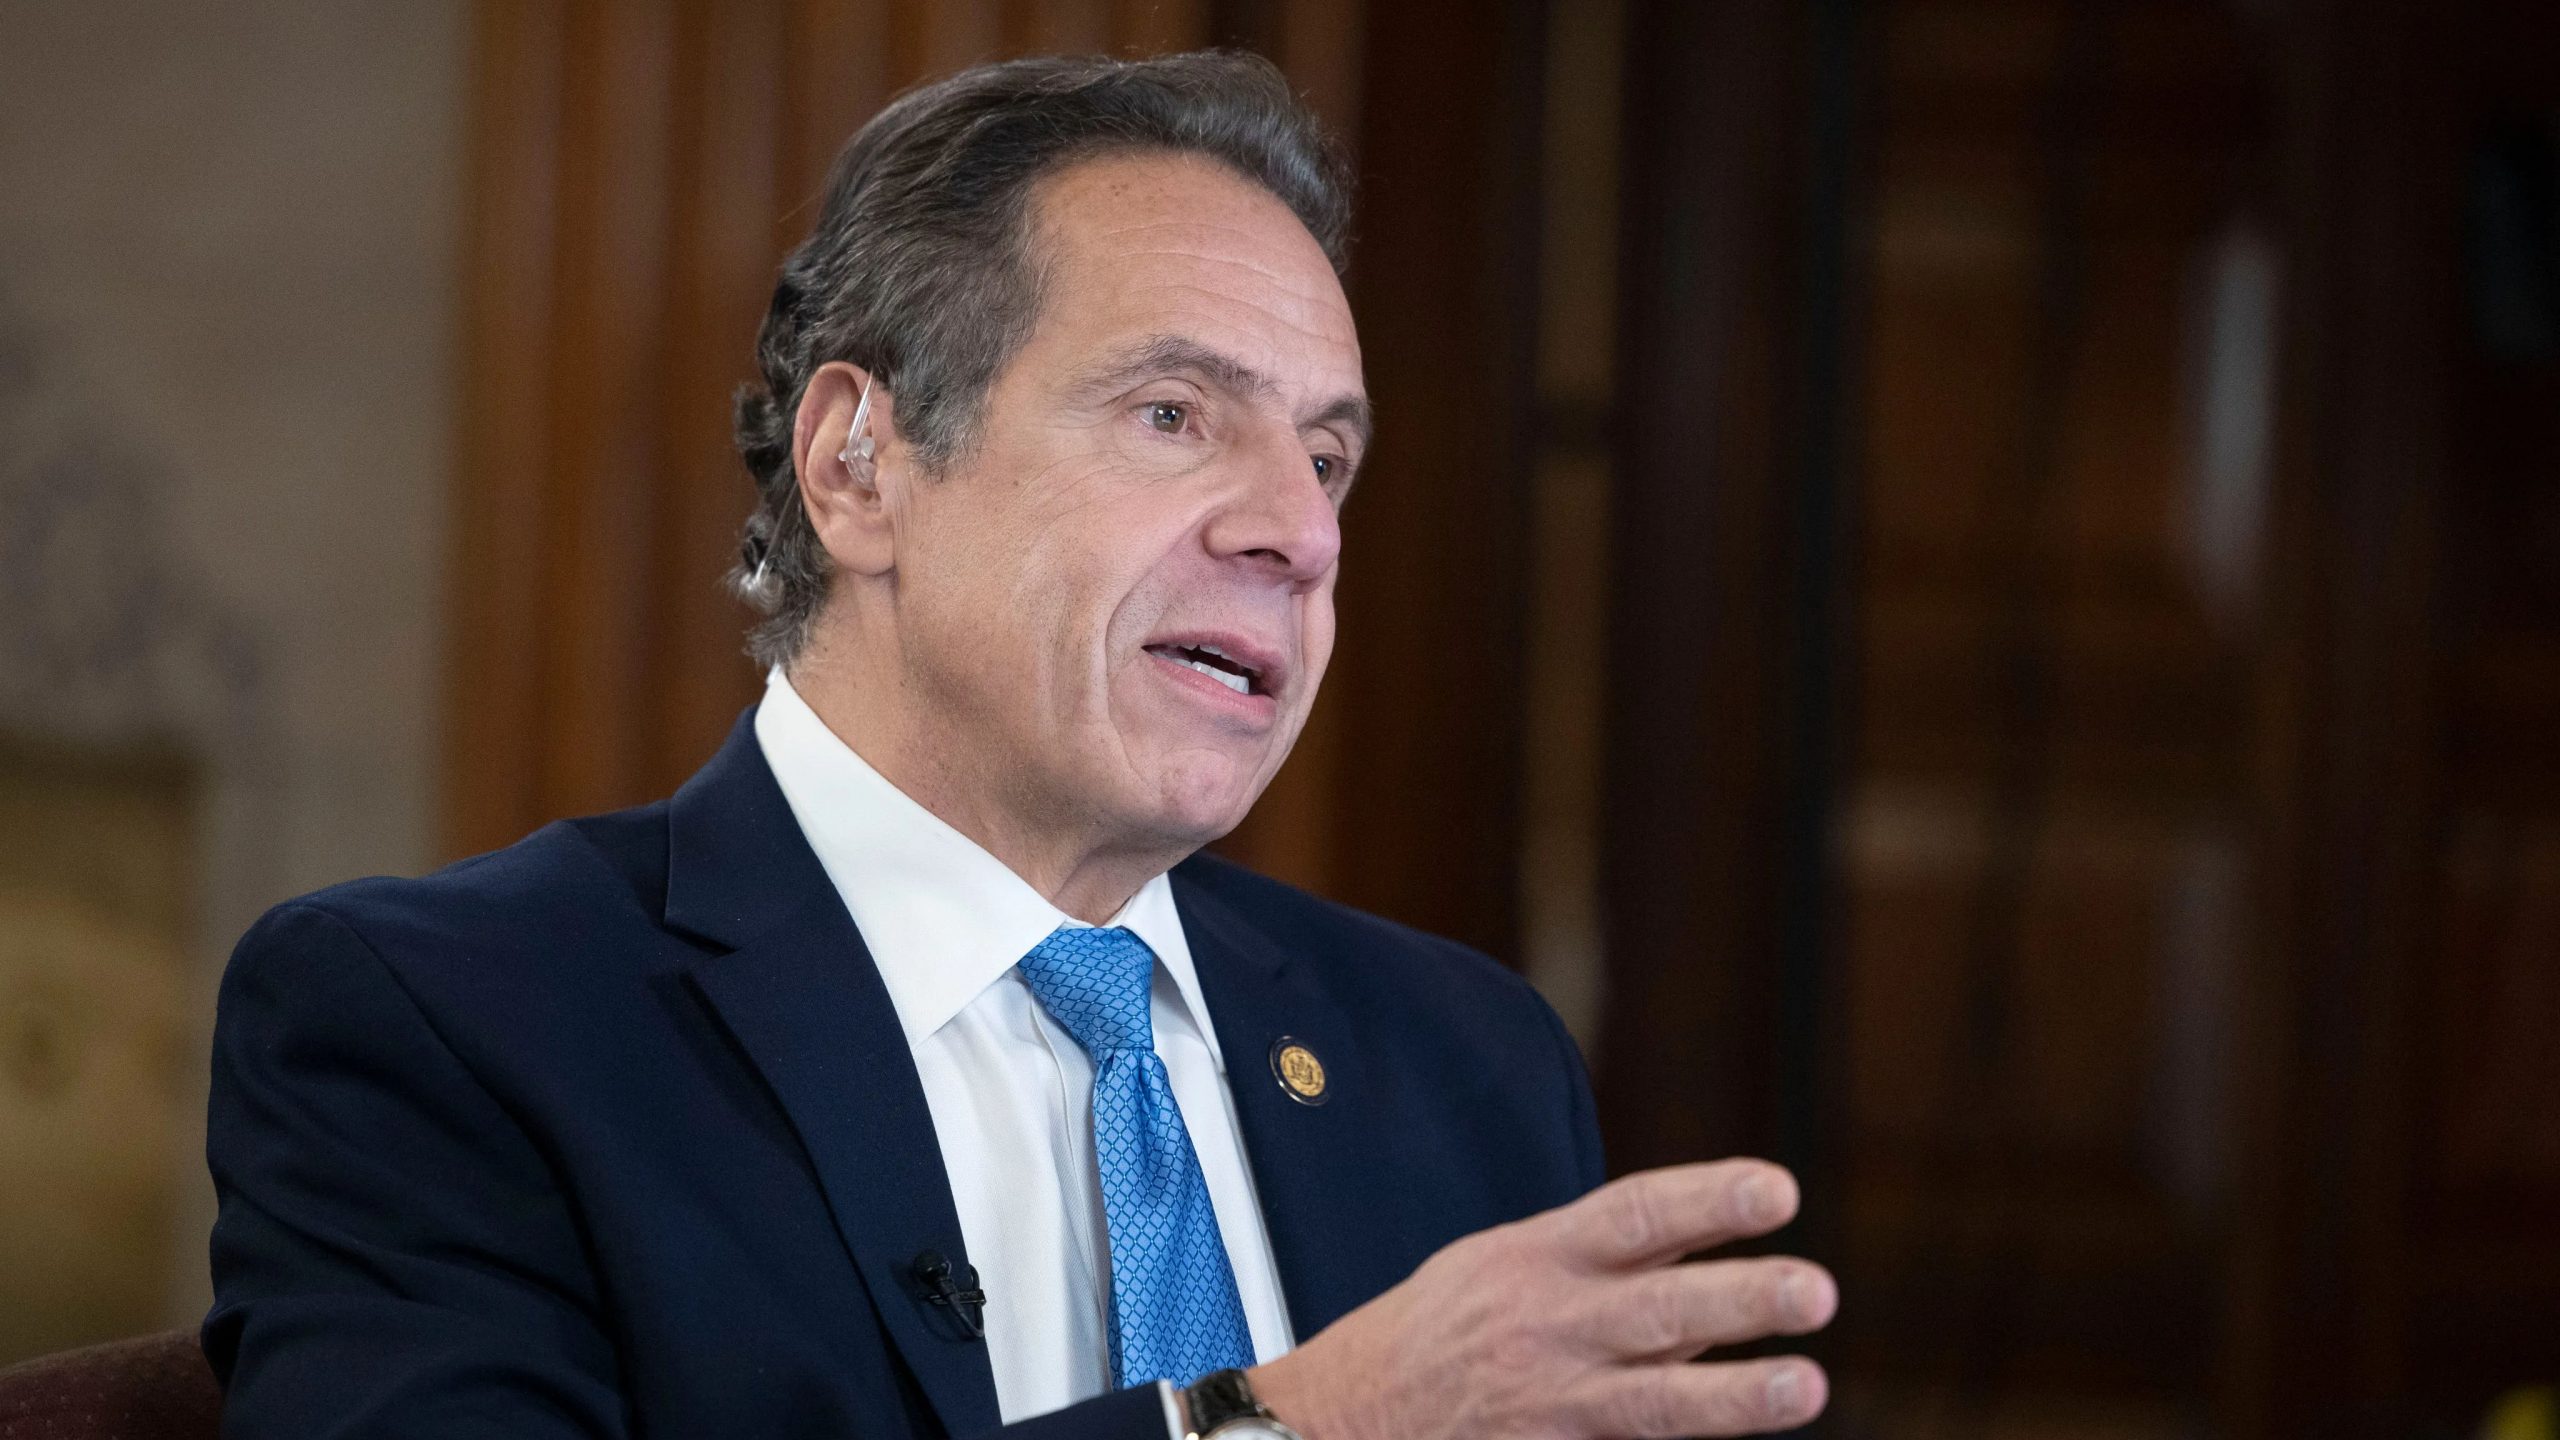 Andrew Cuomo sexually harassed multiple women: State attorney general